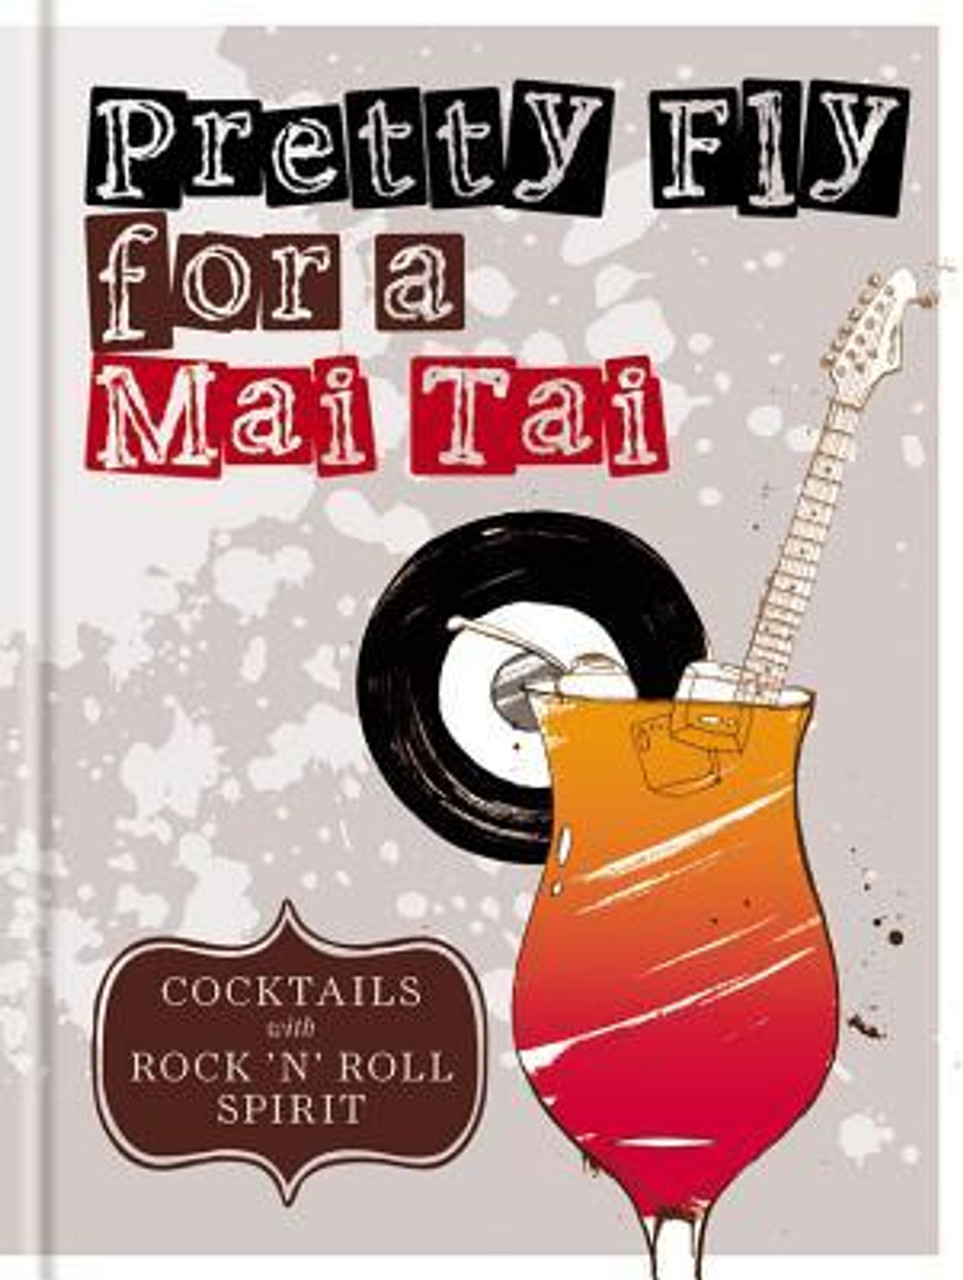 Mitchell Beazley / Pretty Fly For a Mai Tai: Cocktails with rock 'n' roll spirit (Hardback)